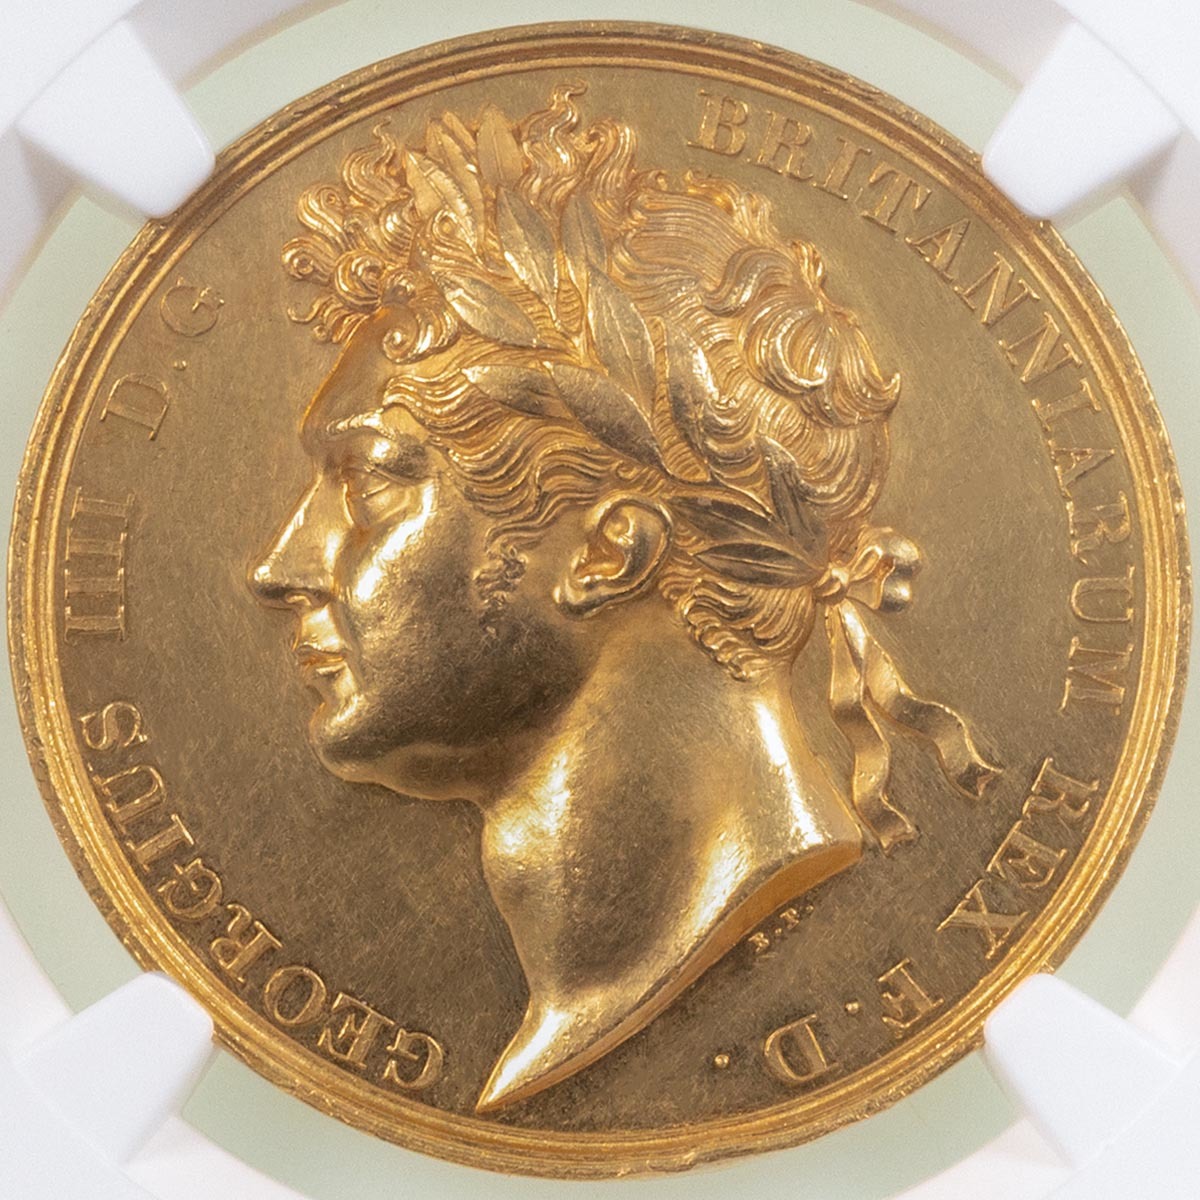 1821 King George IV Gold Coronation Medal Benedetto Pistrucci NGC Graded AU 58 Obverse